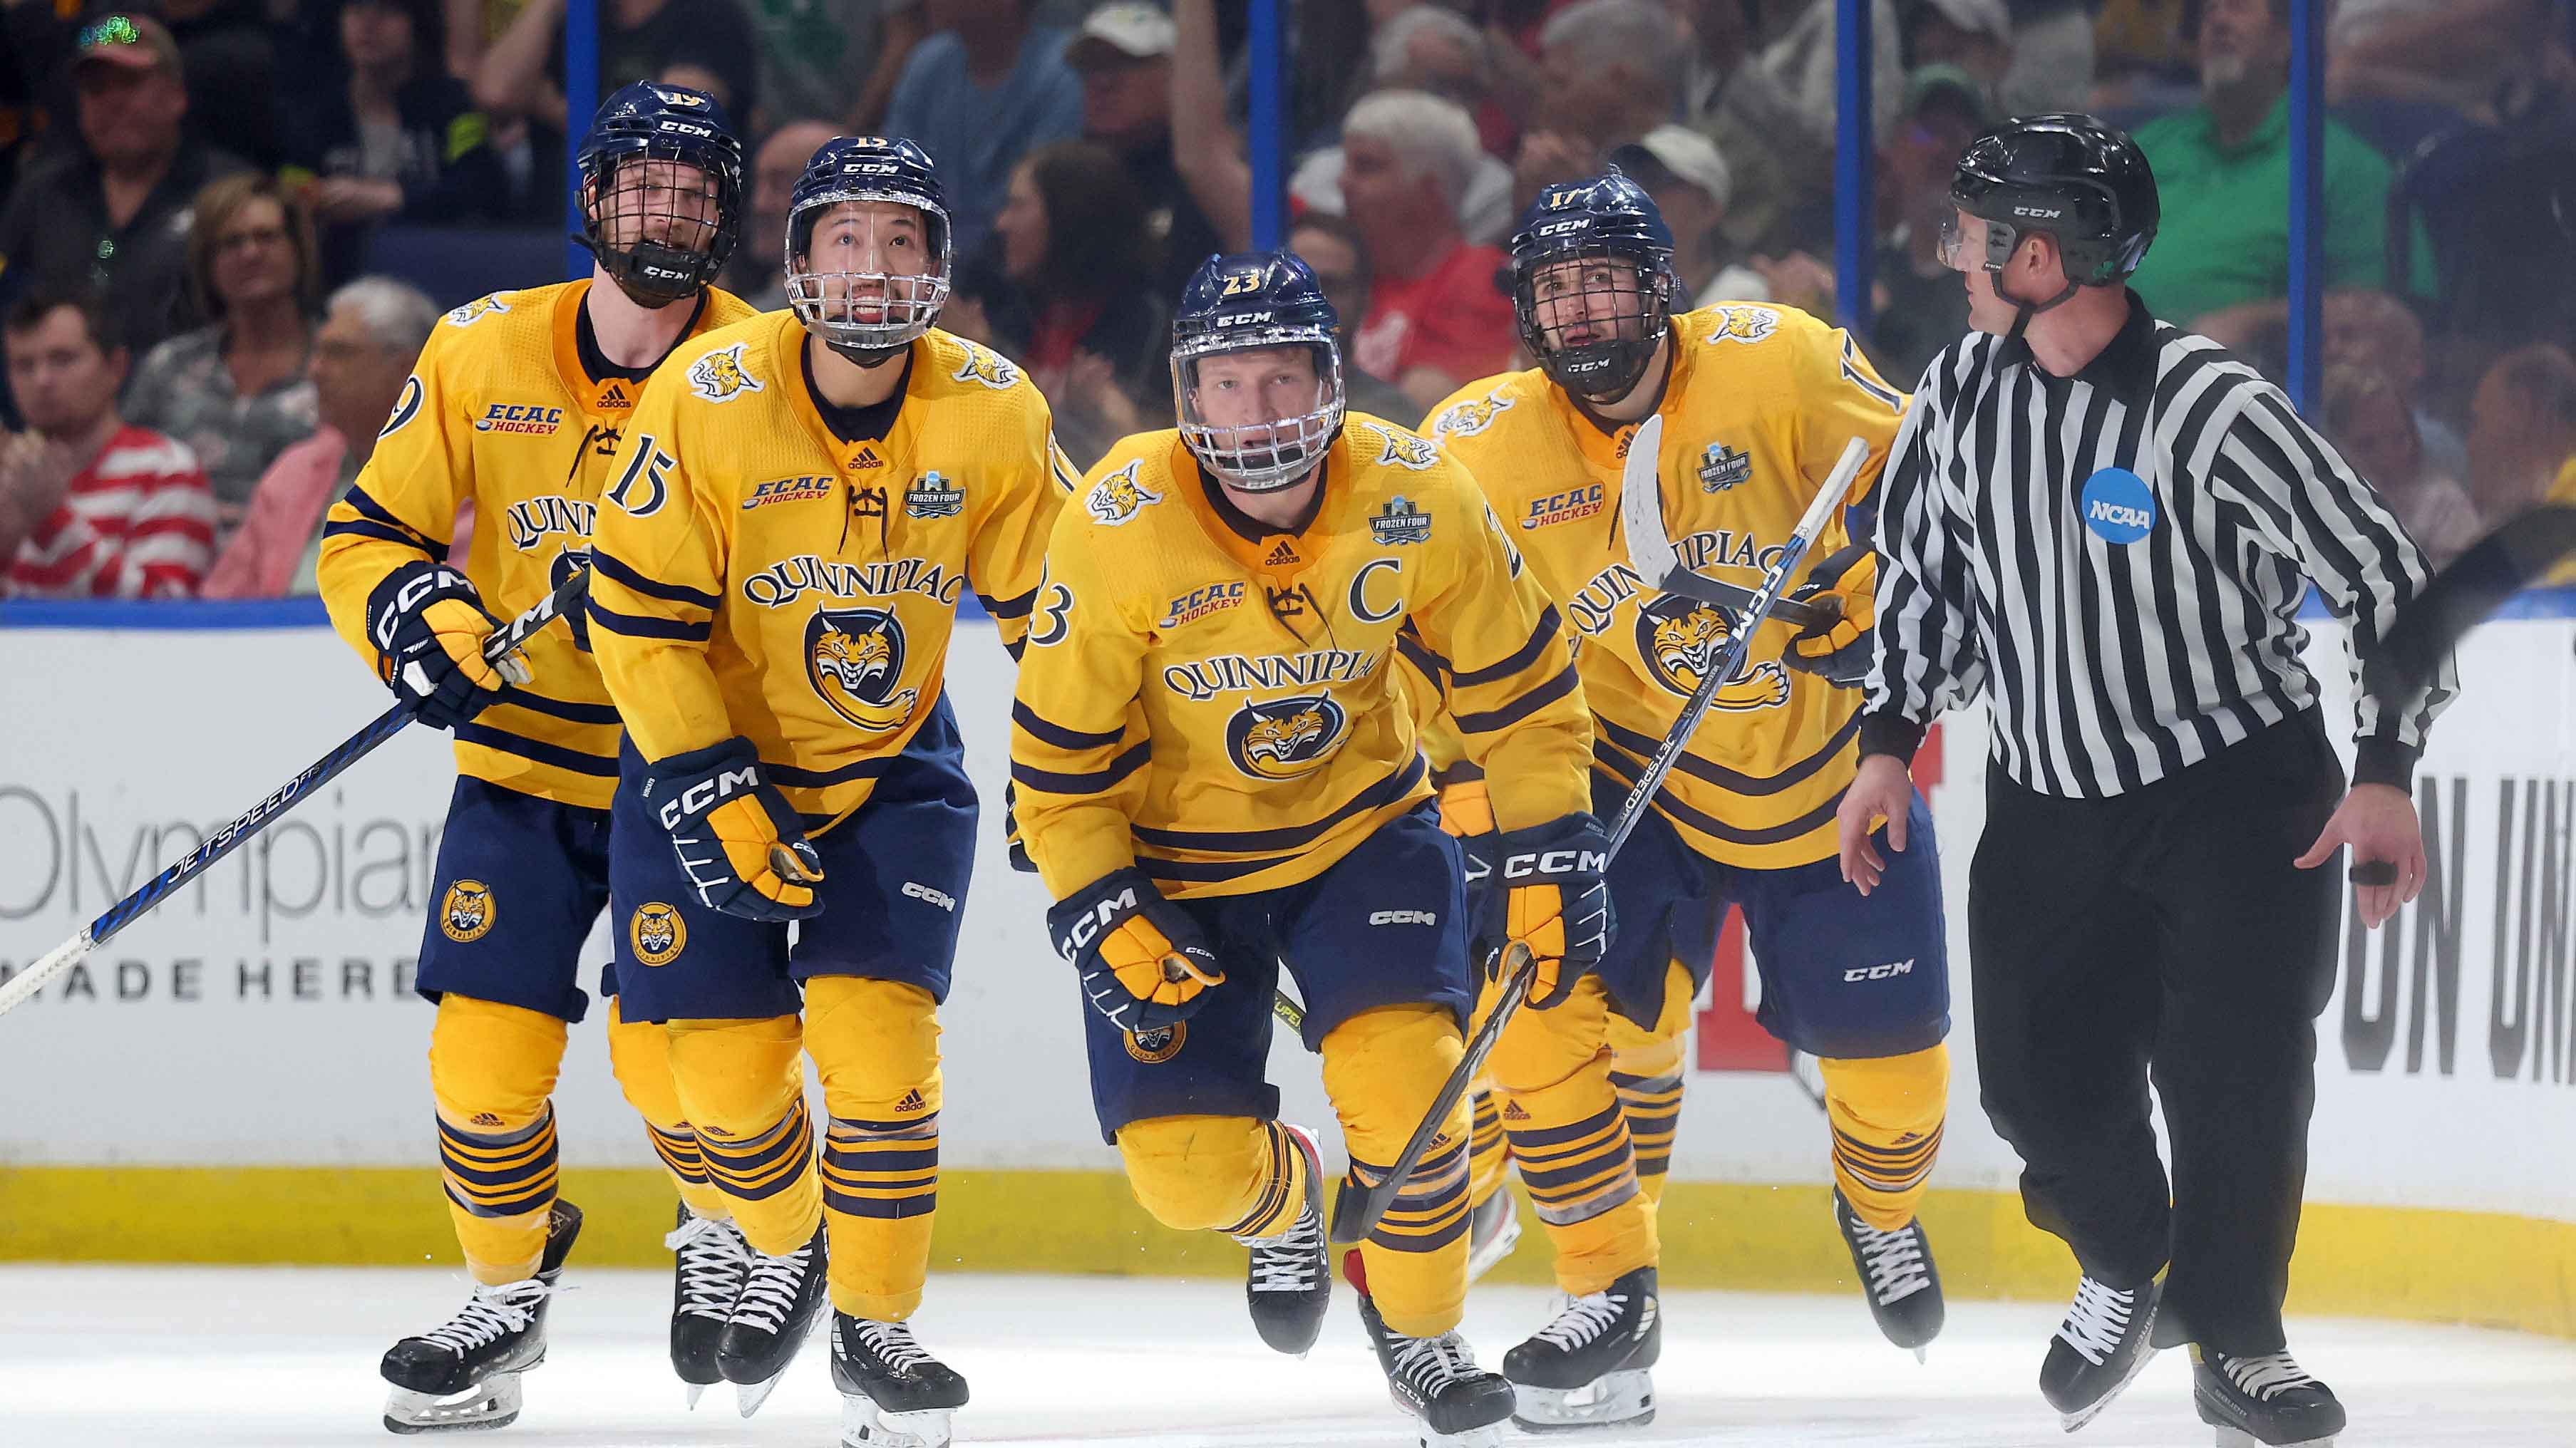 Ice Dogs tops in regular season, runner-up at state tourney, Sports